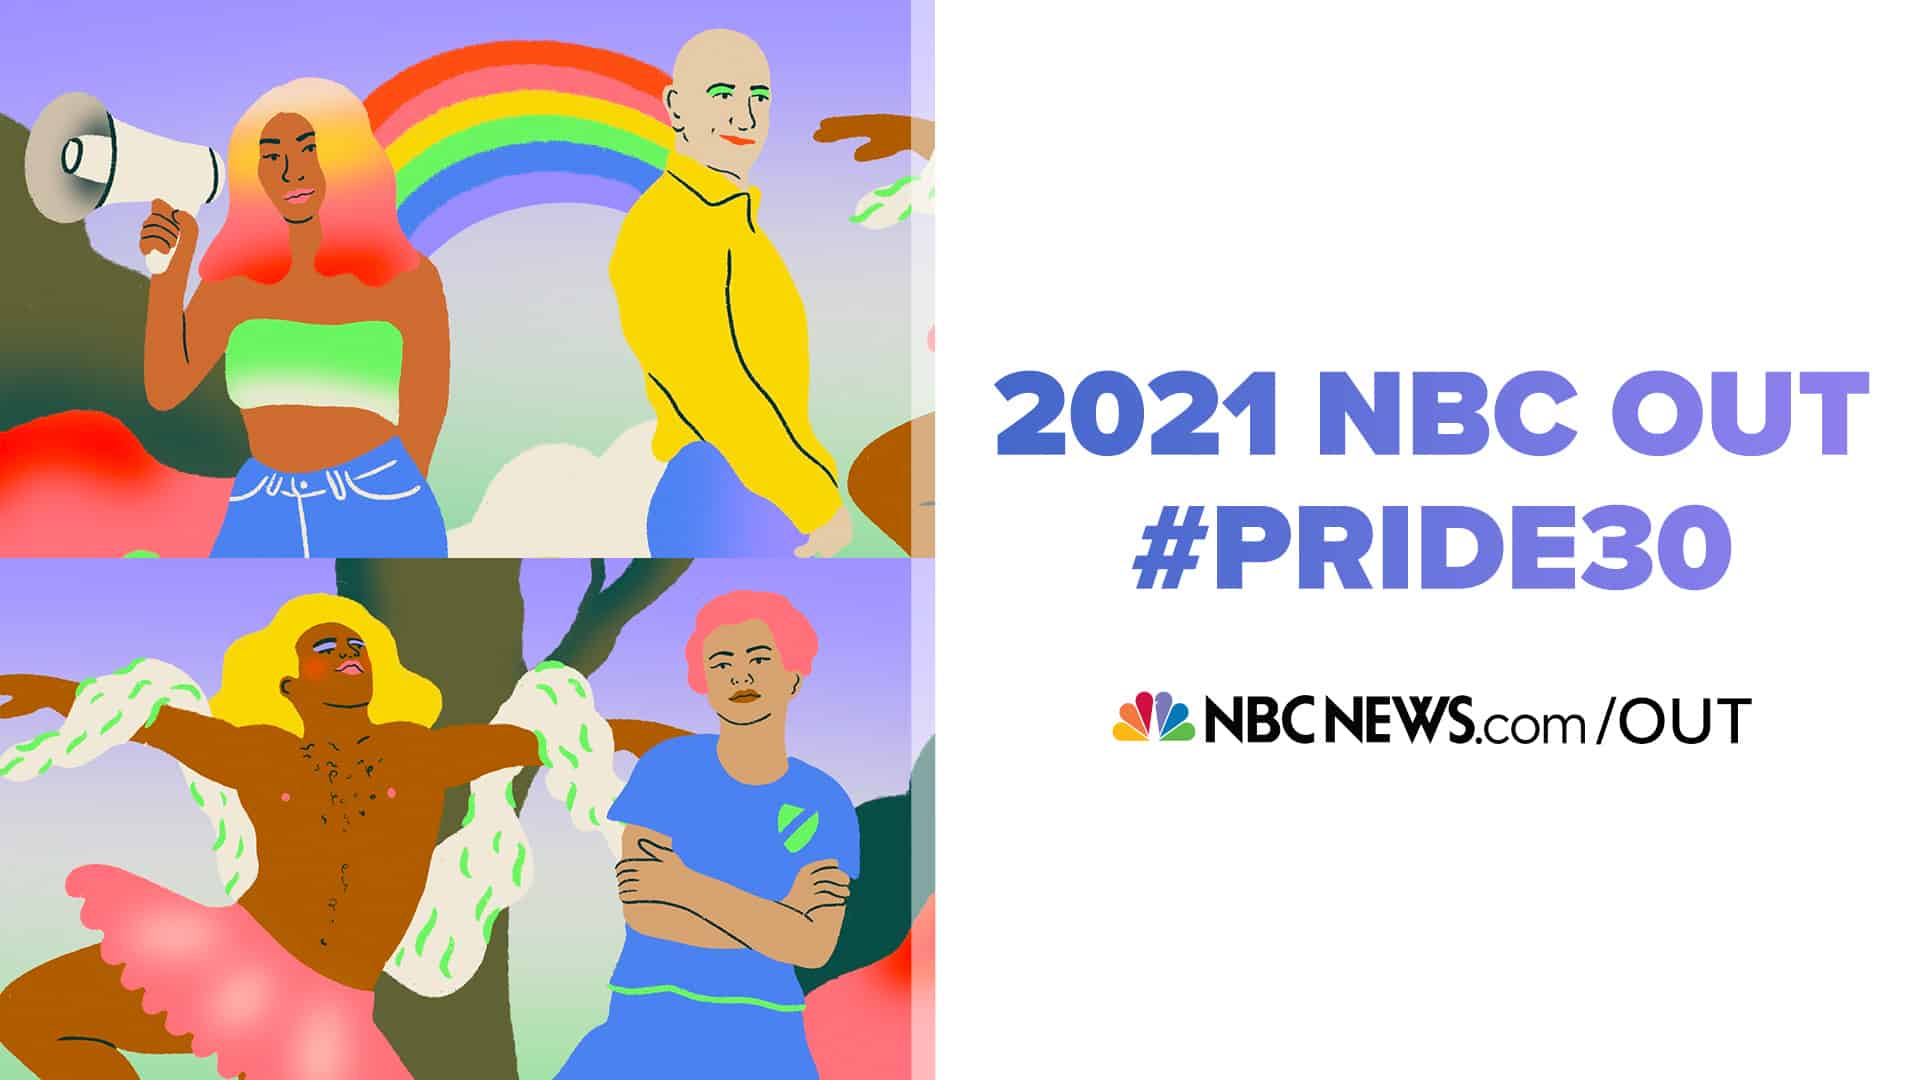 NBC Out Releases Its #Pride30 List